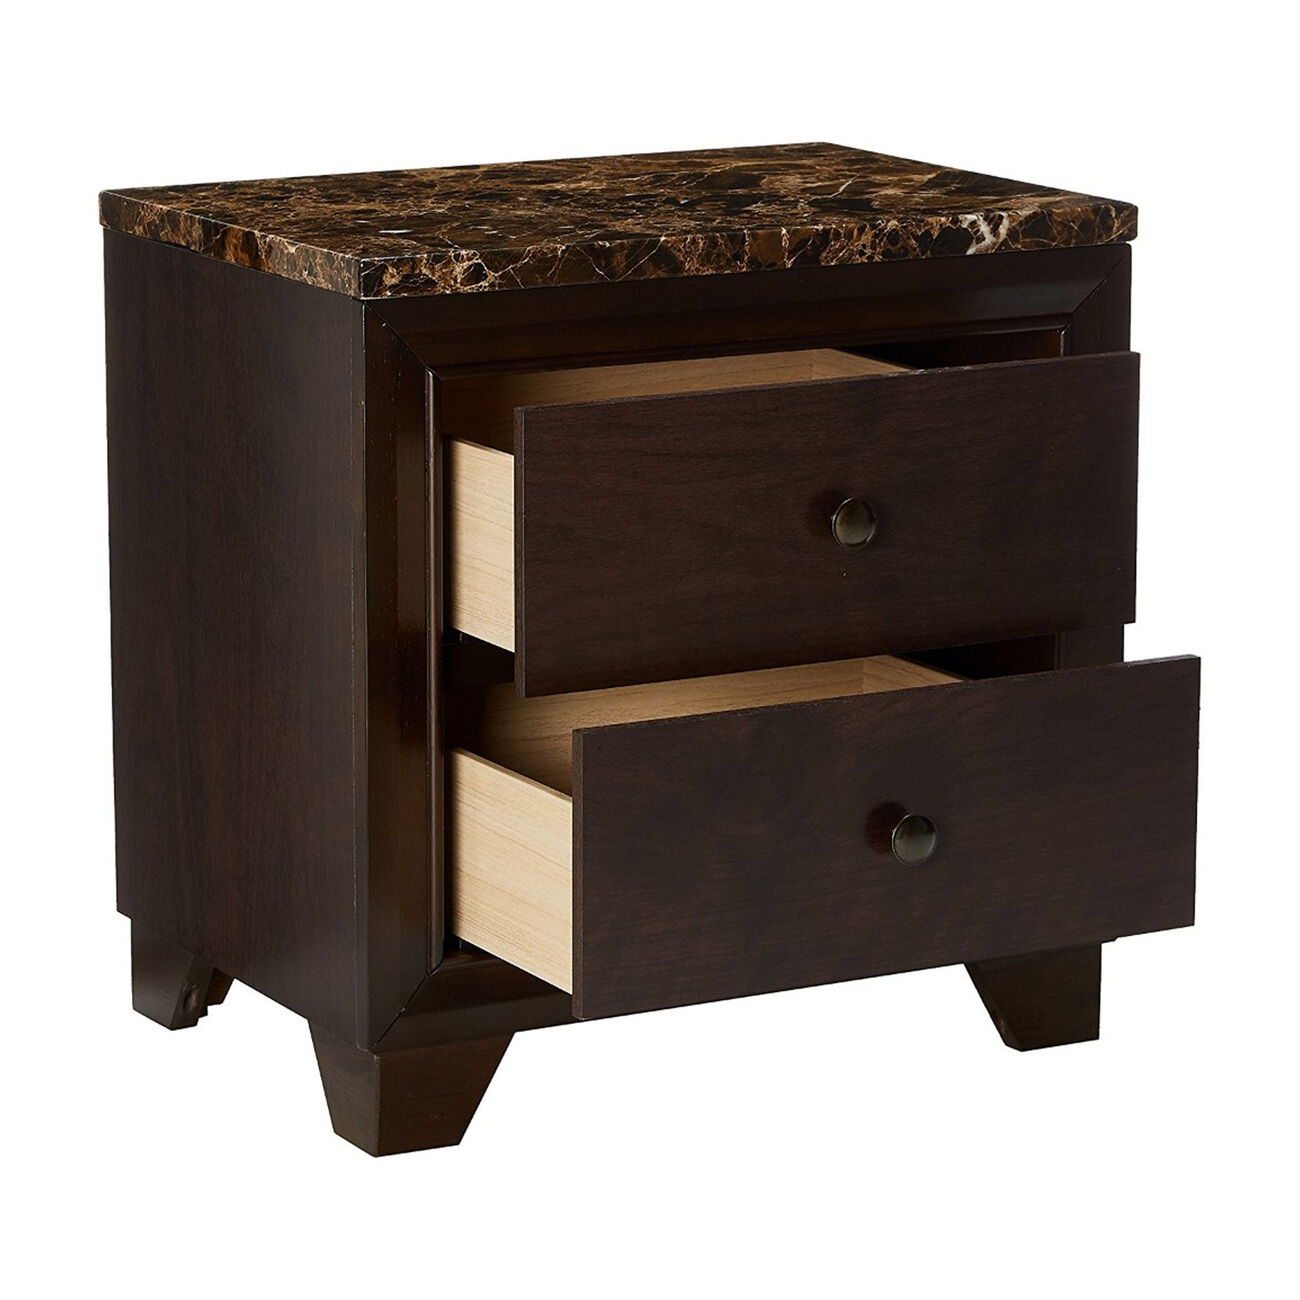 2 Drawer Wooden Nightstand with Faux Marble Top, Cappuccino Brown